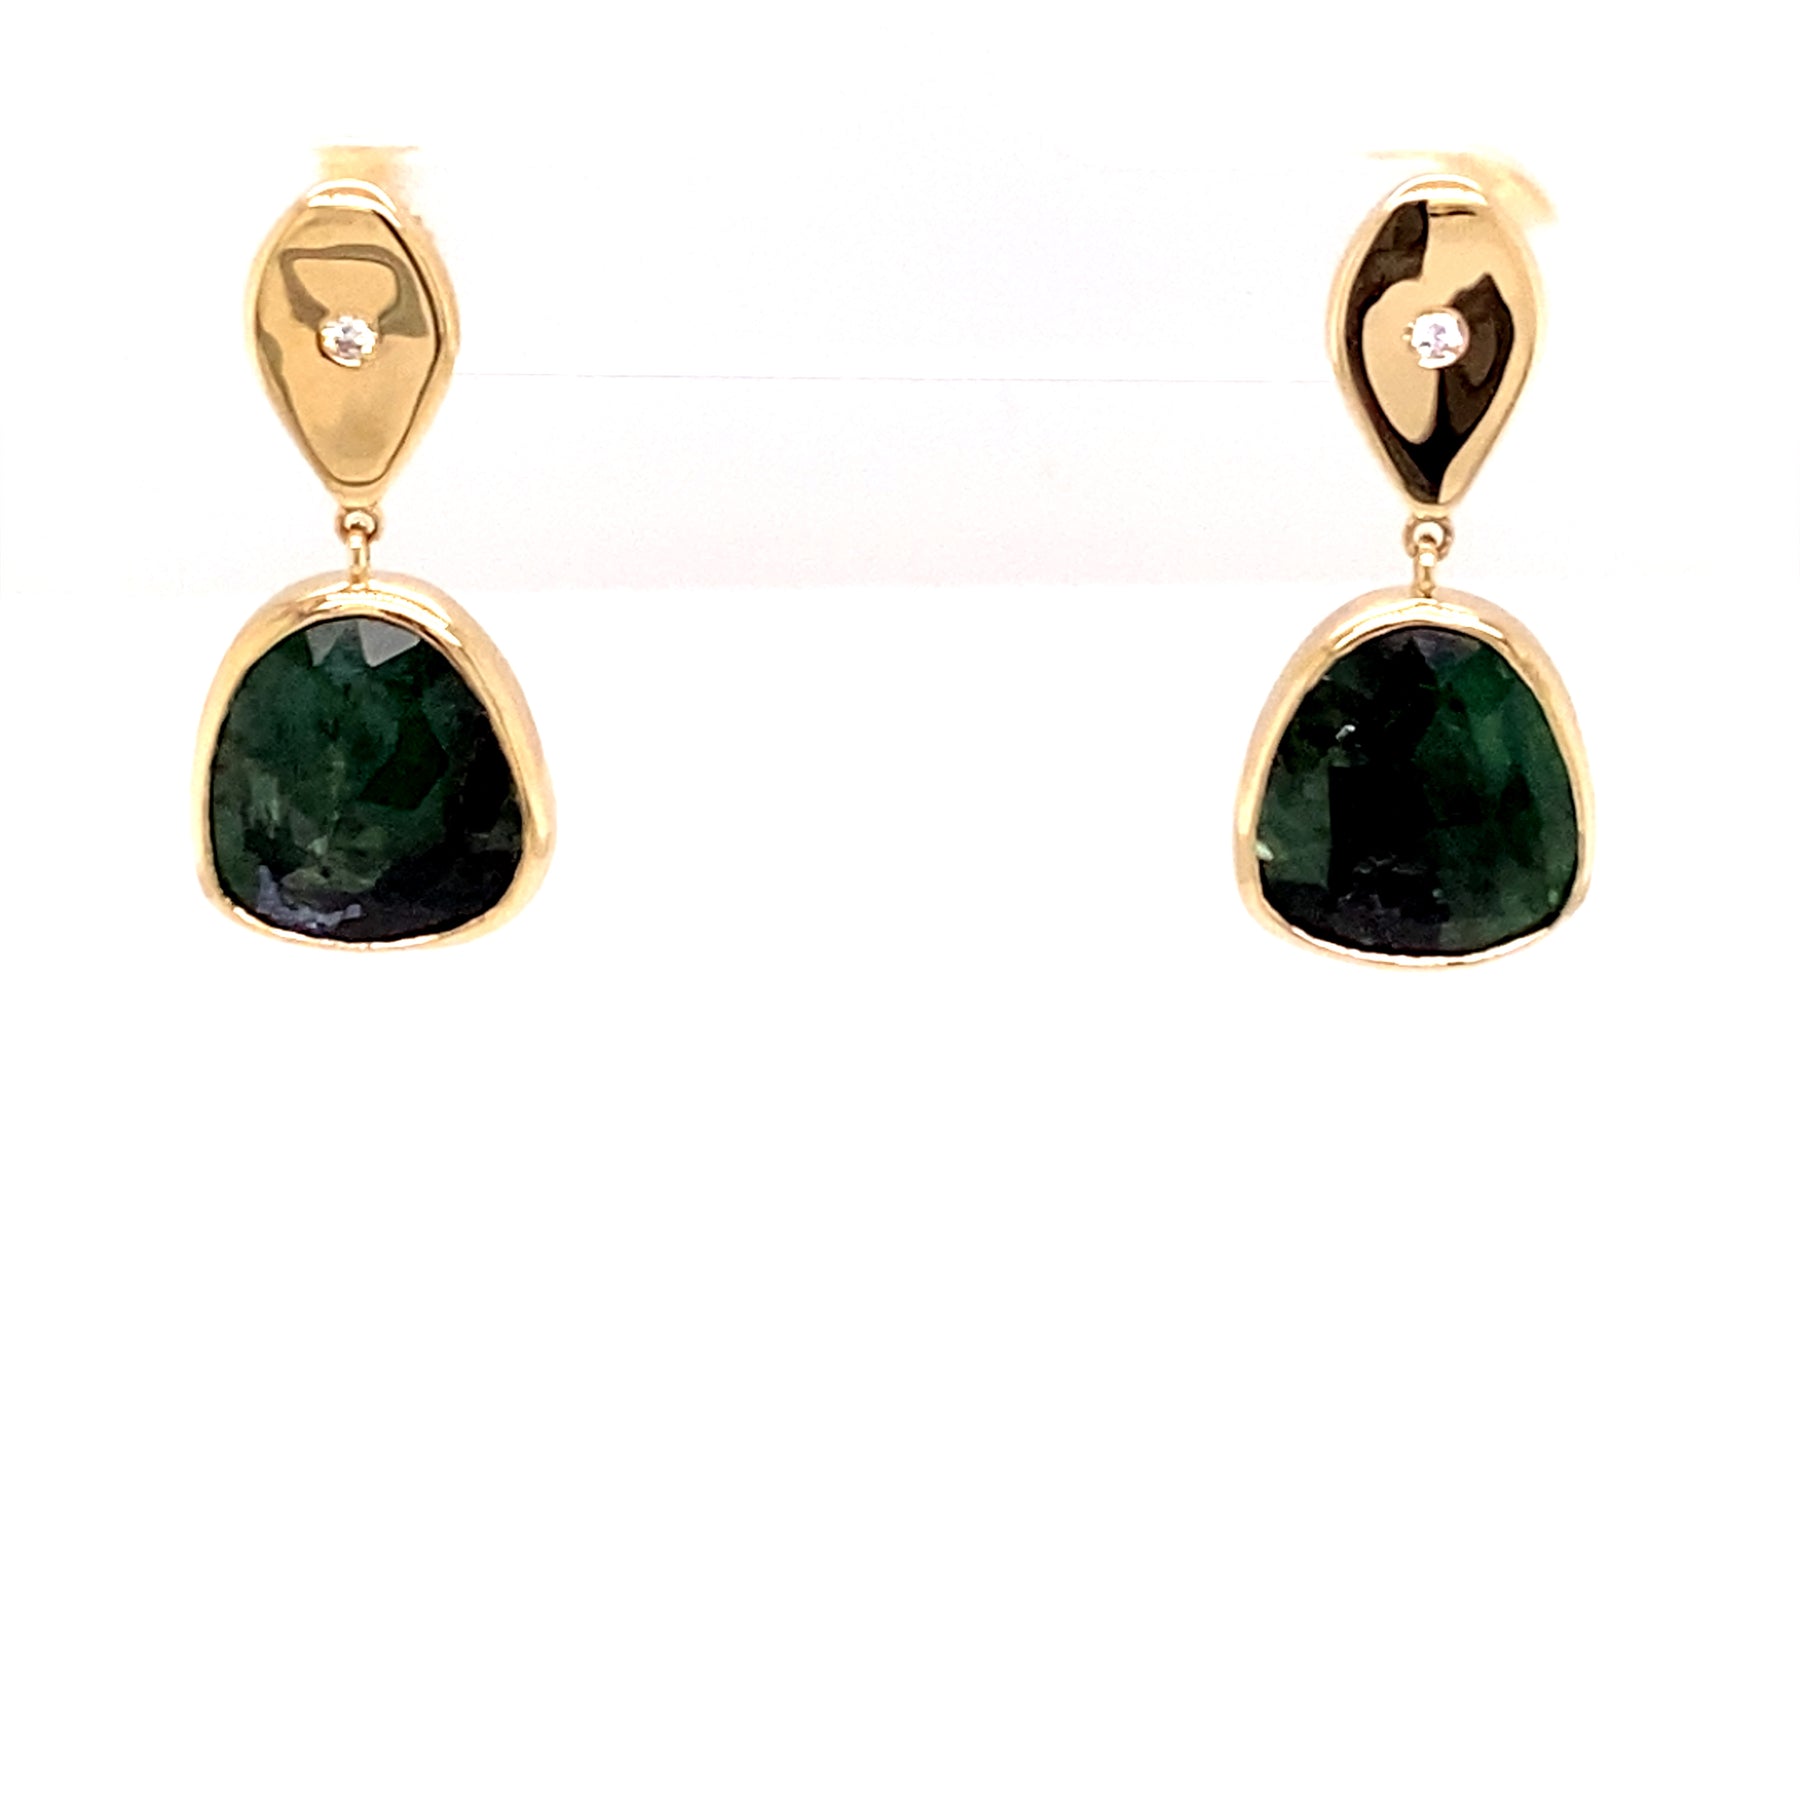 One of a Kind 14K Yellow Gold Teardrop with Natural Emerald Slice Drop Earrings